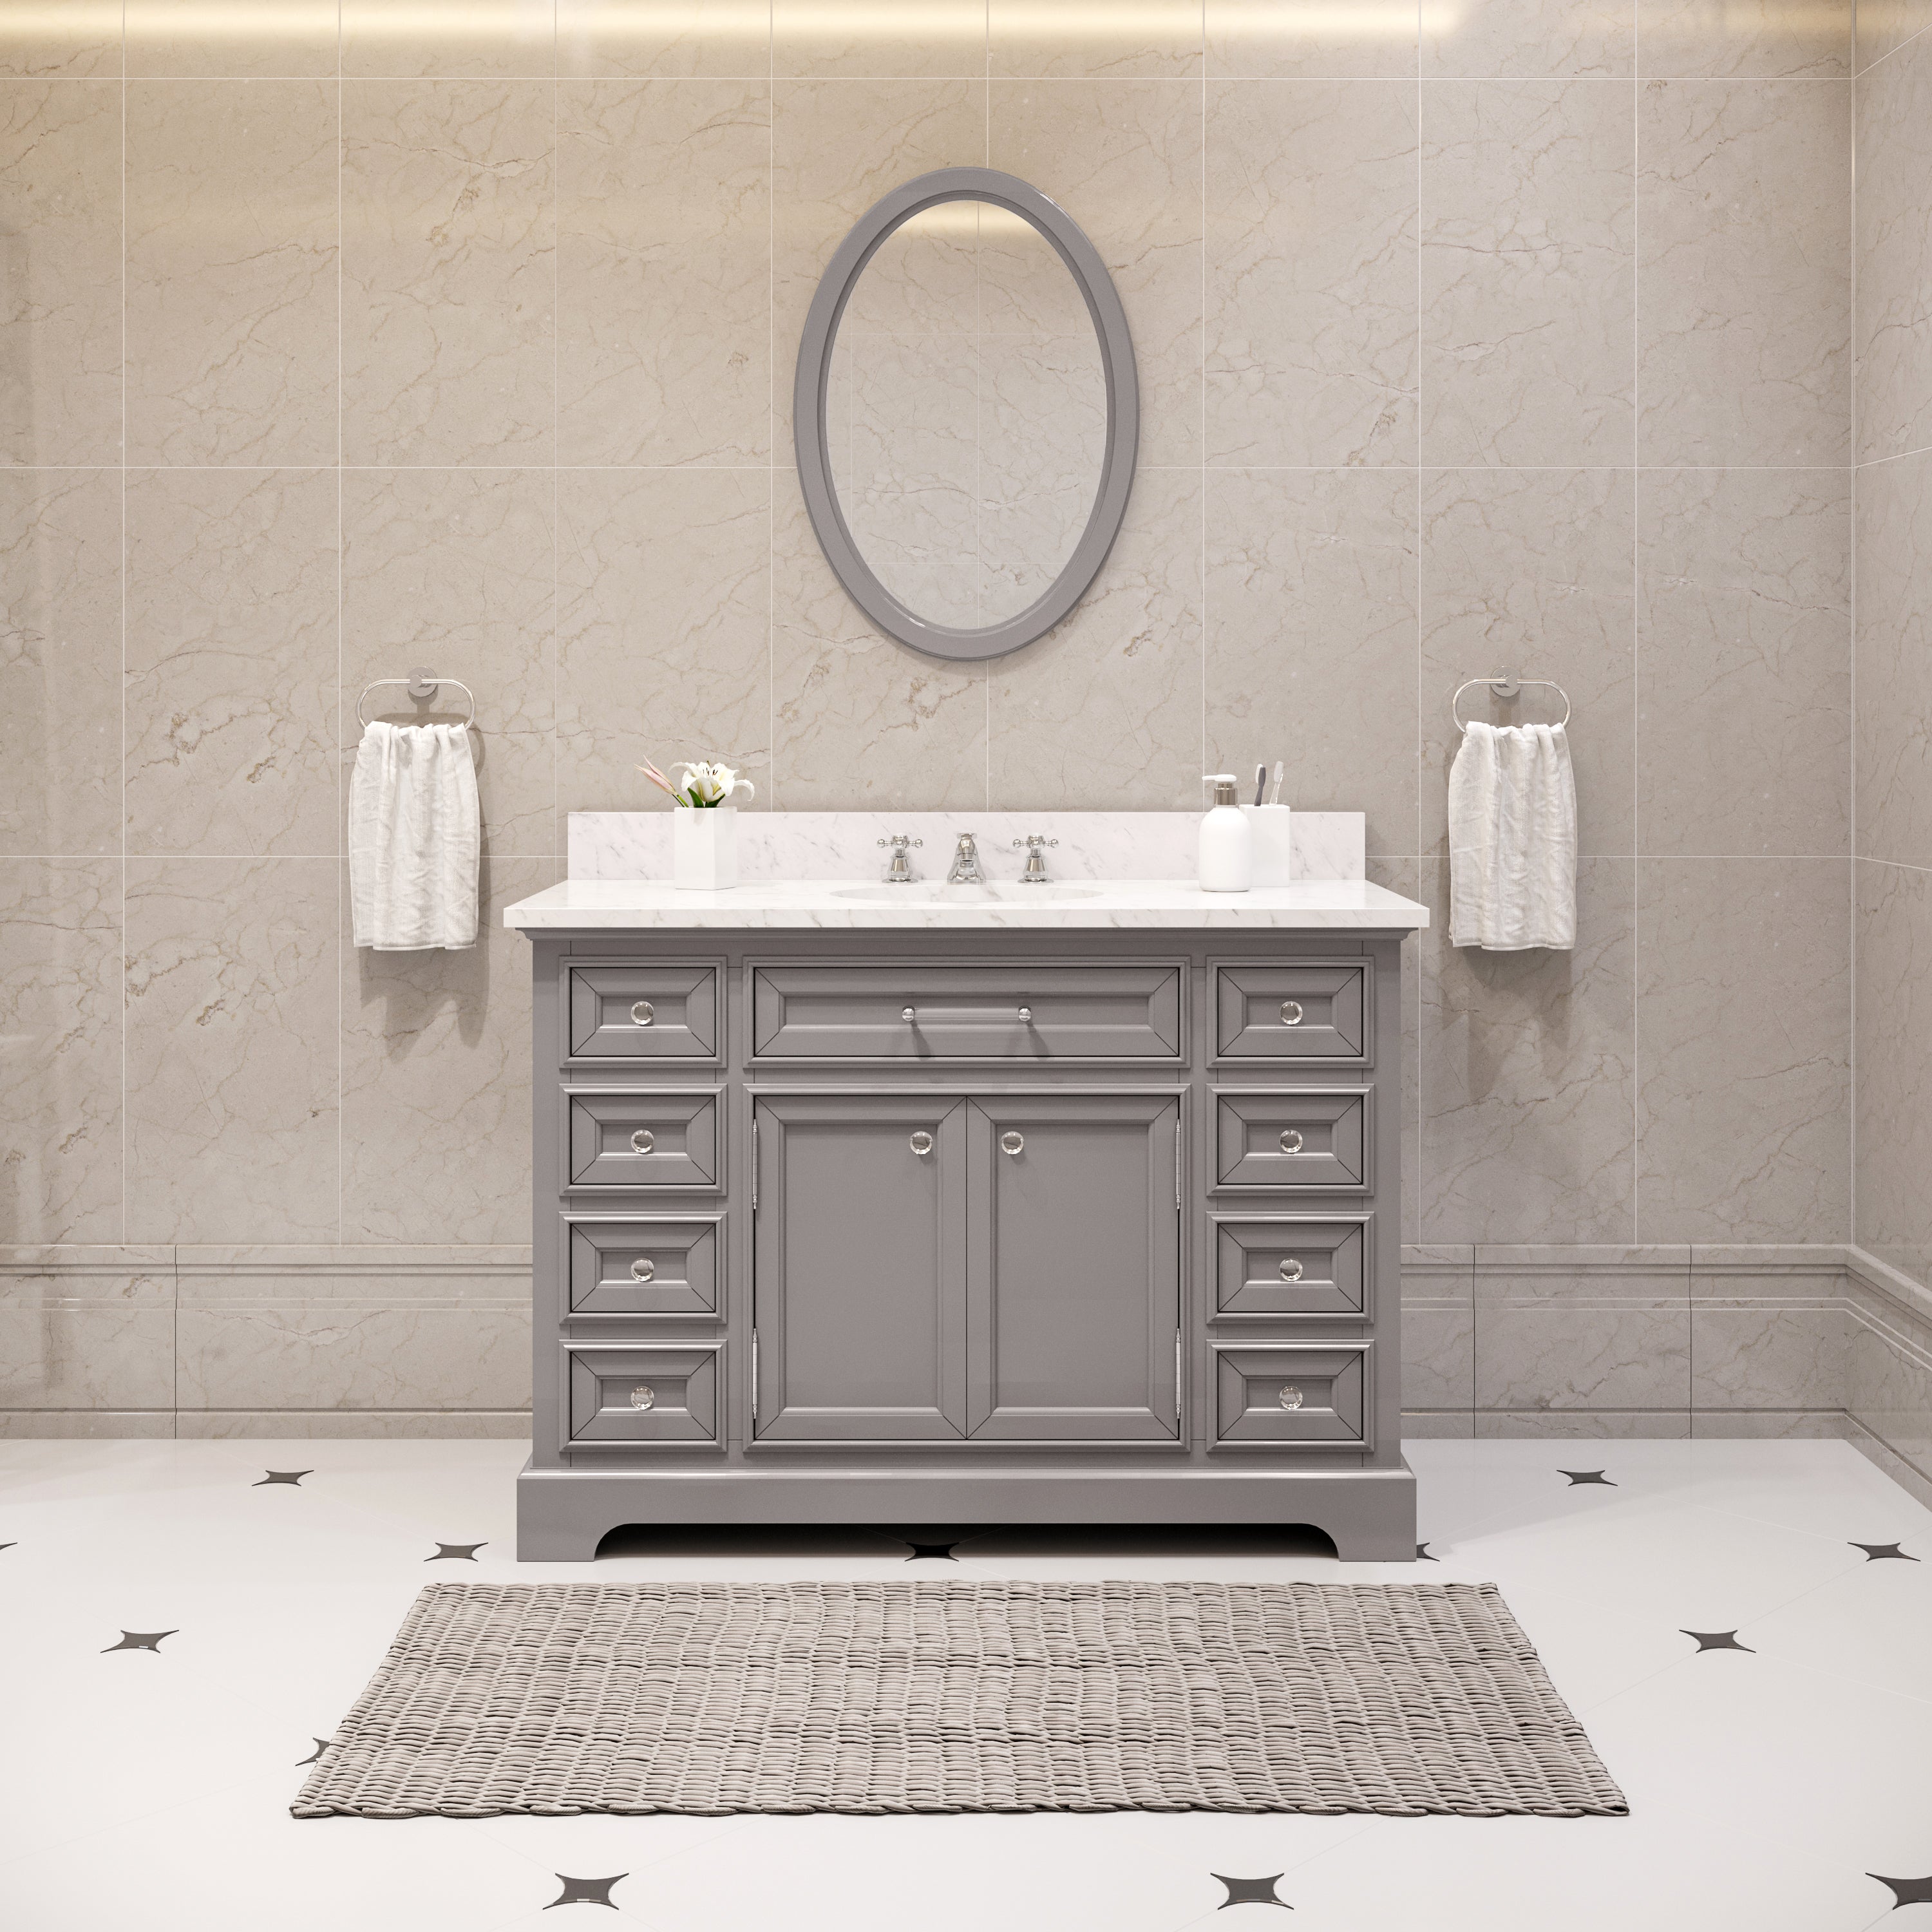 Water Creation | 48 Inch Cashmere Grey Single Sink Bathroom Vanity With Matching Framed Mirror From The Derby Collection | DE48CW01CG-O24000000